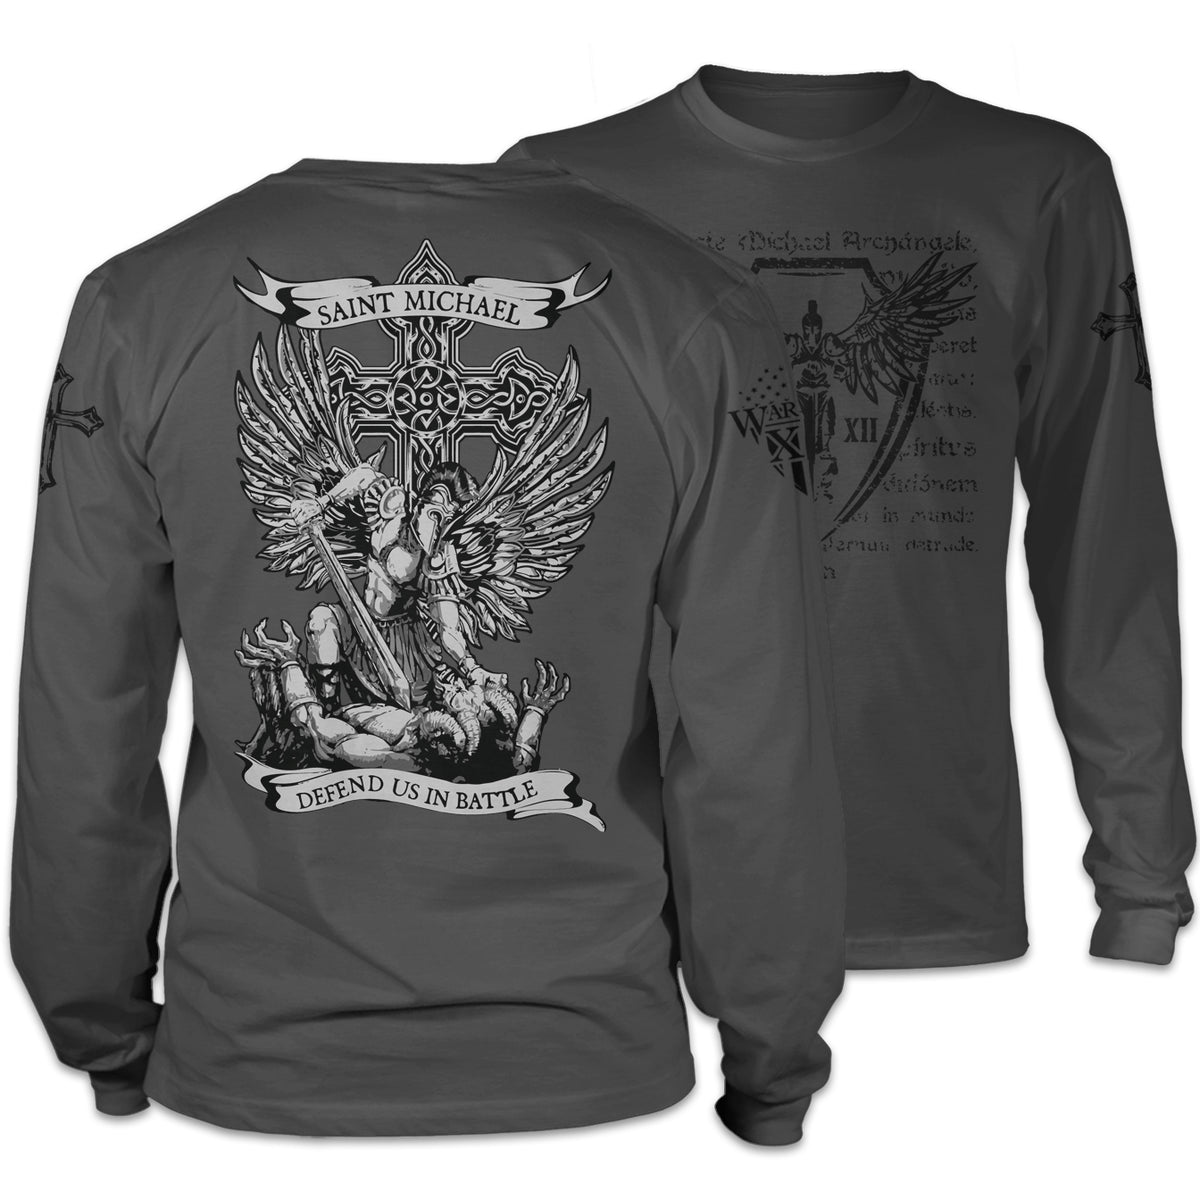 Front & back grey long sleeve shirt with the words "Saint Michael defend us in battle" with Saint Michael Archangel in battle printed on the shirt.